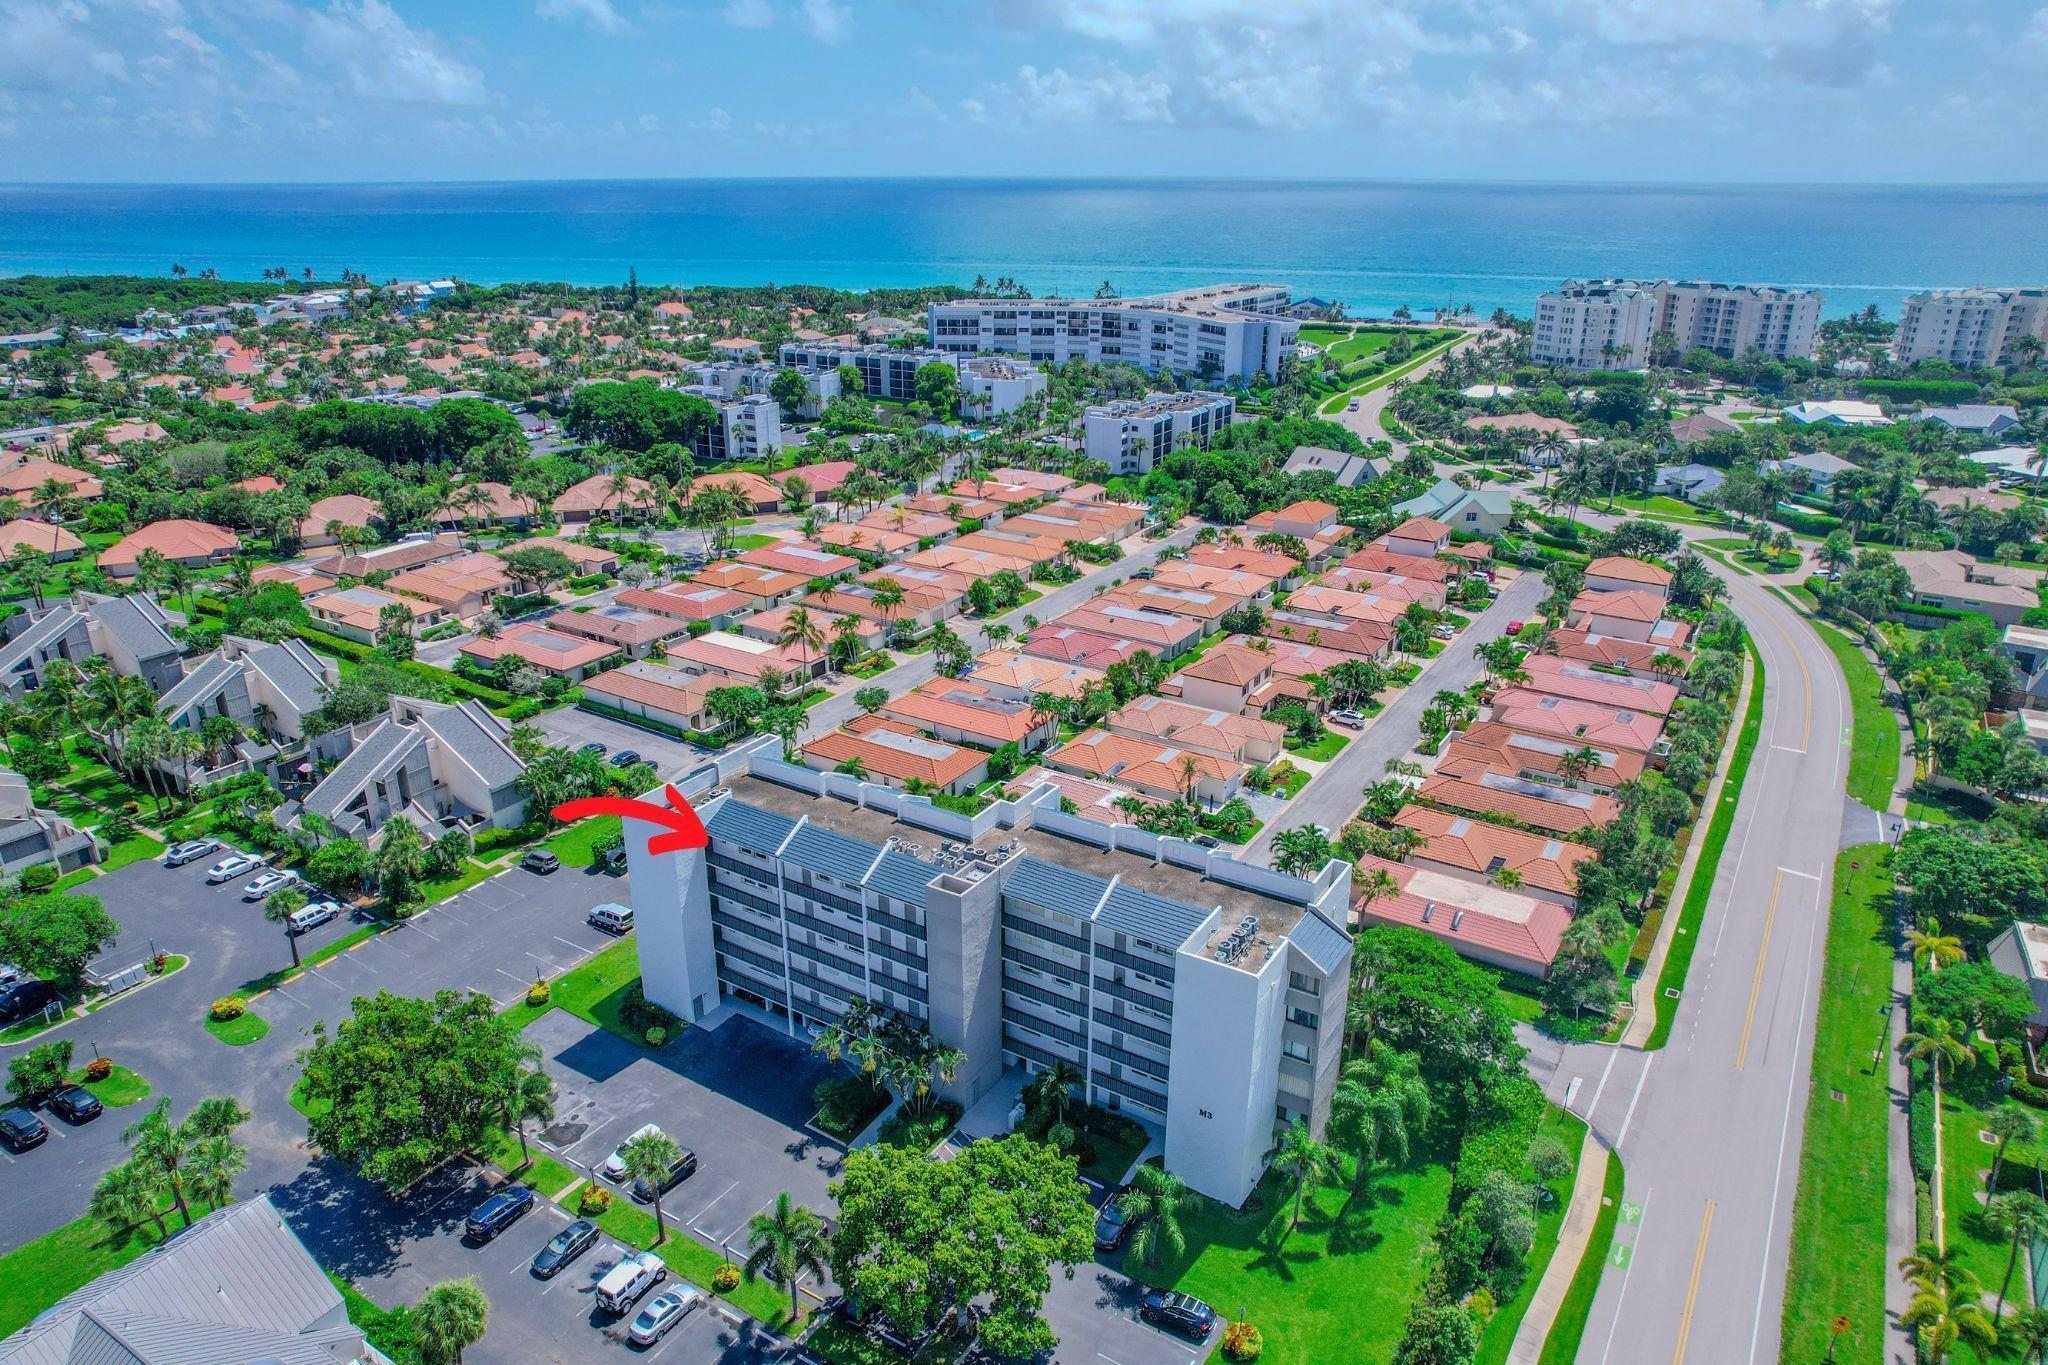 Welome to a lovely spacious 3 bedroom condo, nicely furnished, wood flooring and updated. Screened balcony offers a distant view of the ocean. 3rd bedroom iss an officw/den with pull out couch.  Great Jupiter location, walk to beach, minutes to wonderful restaurants, shopping, theaters, golf, walking trails. 90 day minimum lease